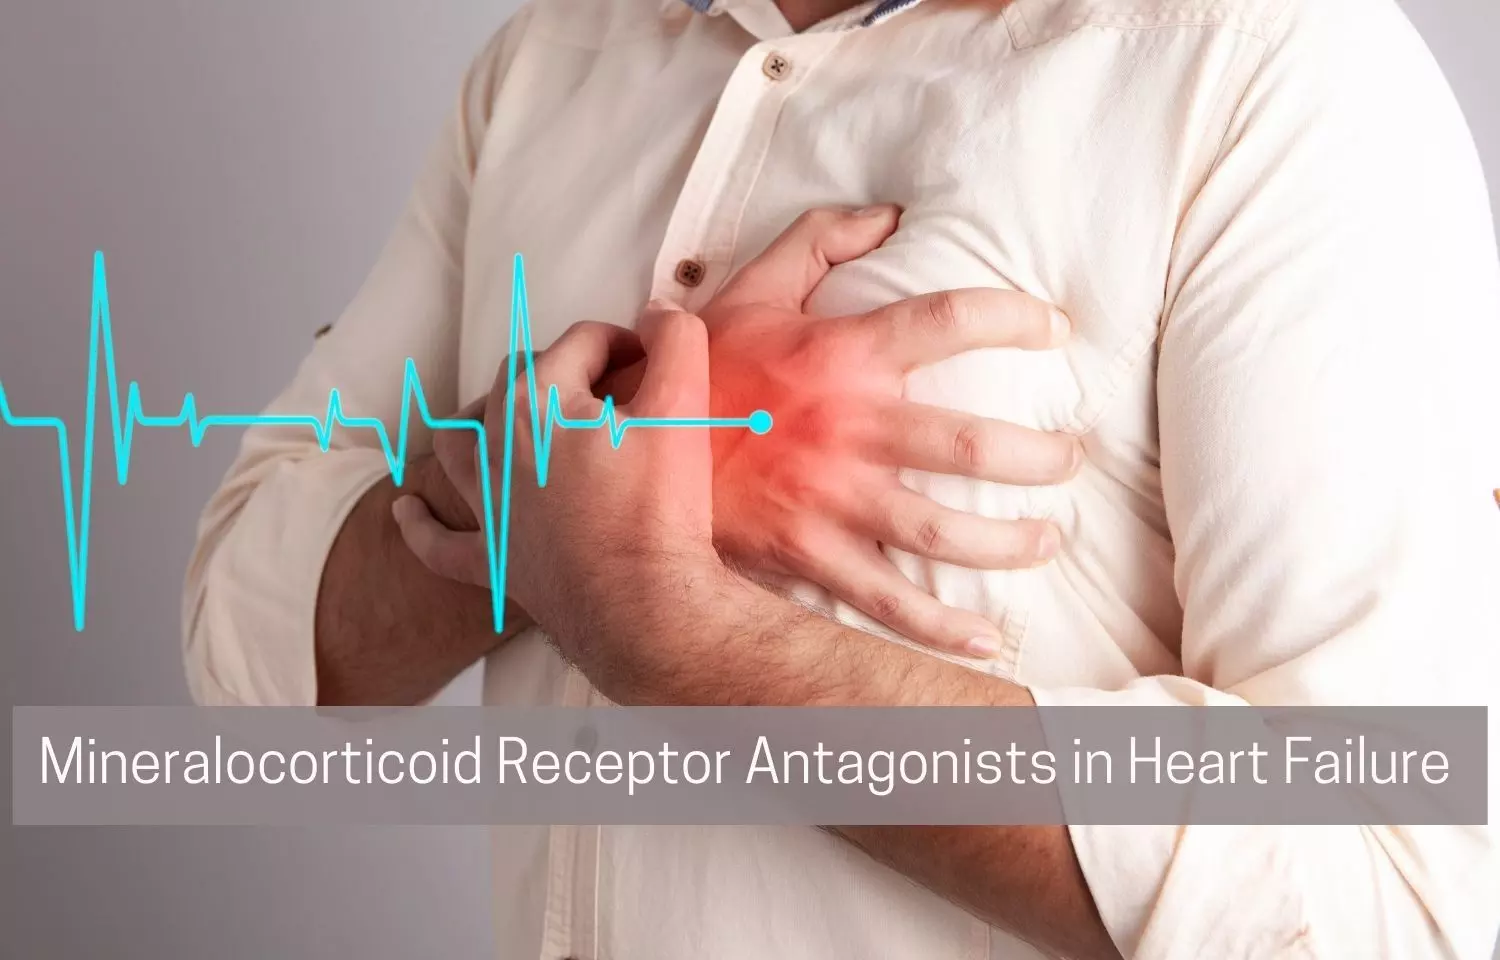 Mineralocorticoid Receptor Antagonists offer great economic value in HF patients: AHA/ACC/HFSA 2022.